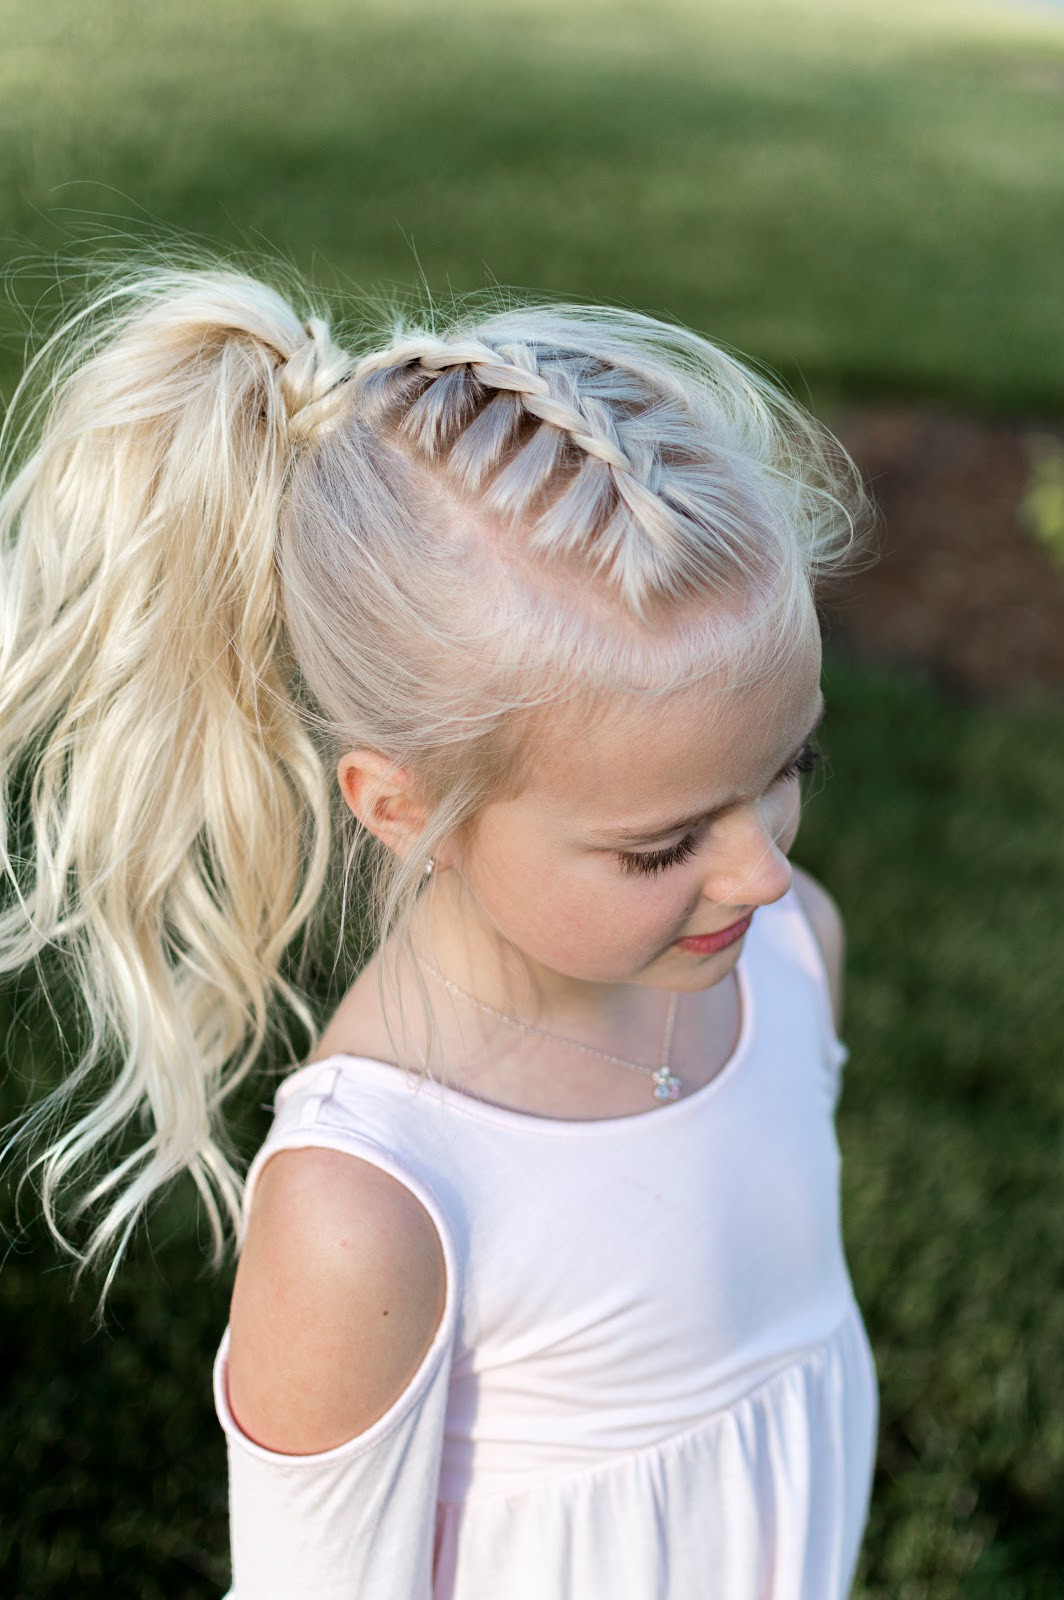 Little Girl Pigtails Hairstyles
 DIY Hairstyle Ideas That Take Less Than 10 Minutes